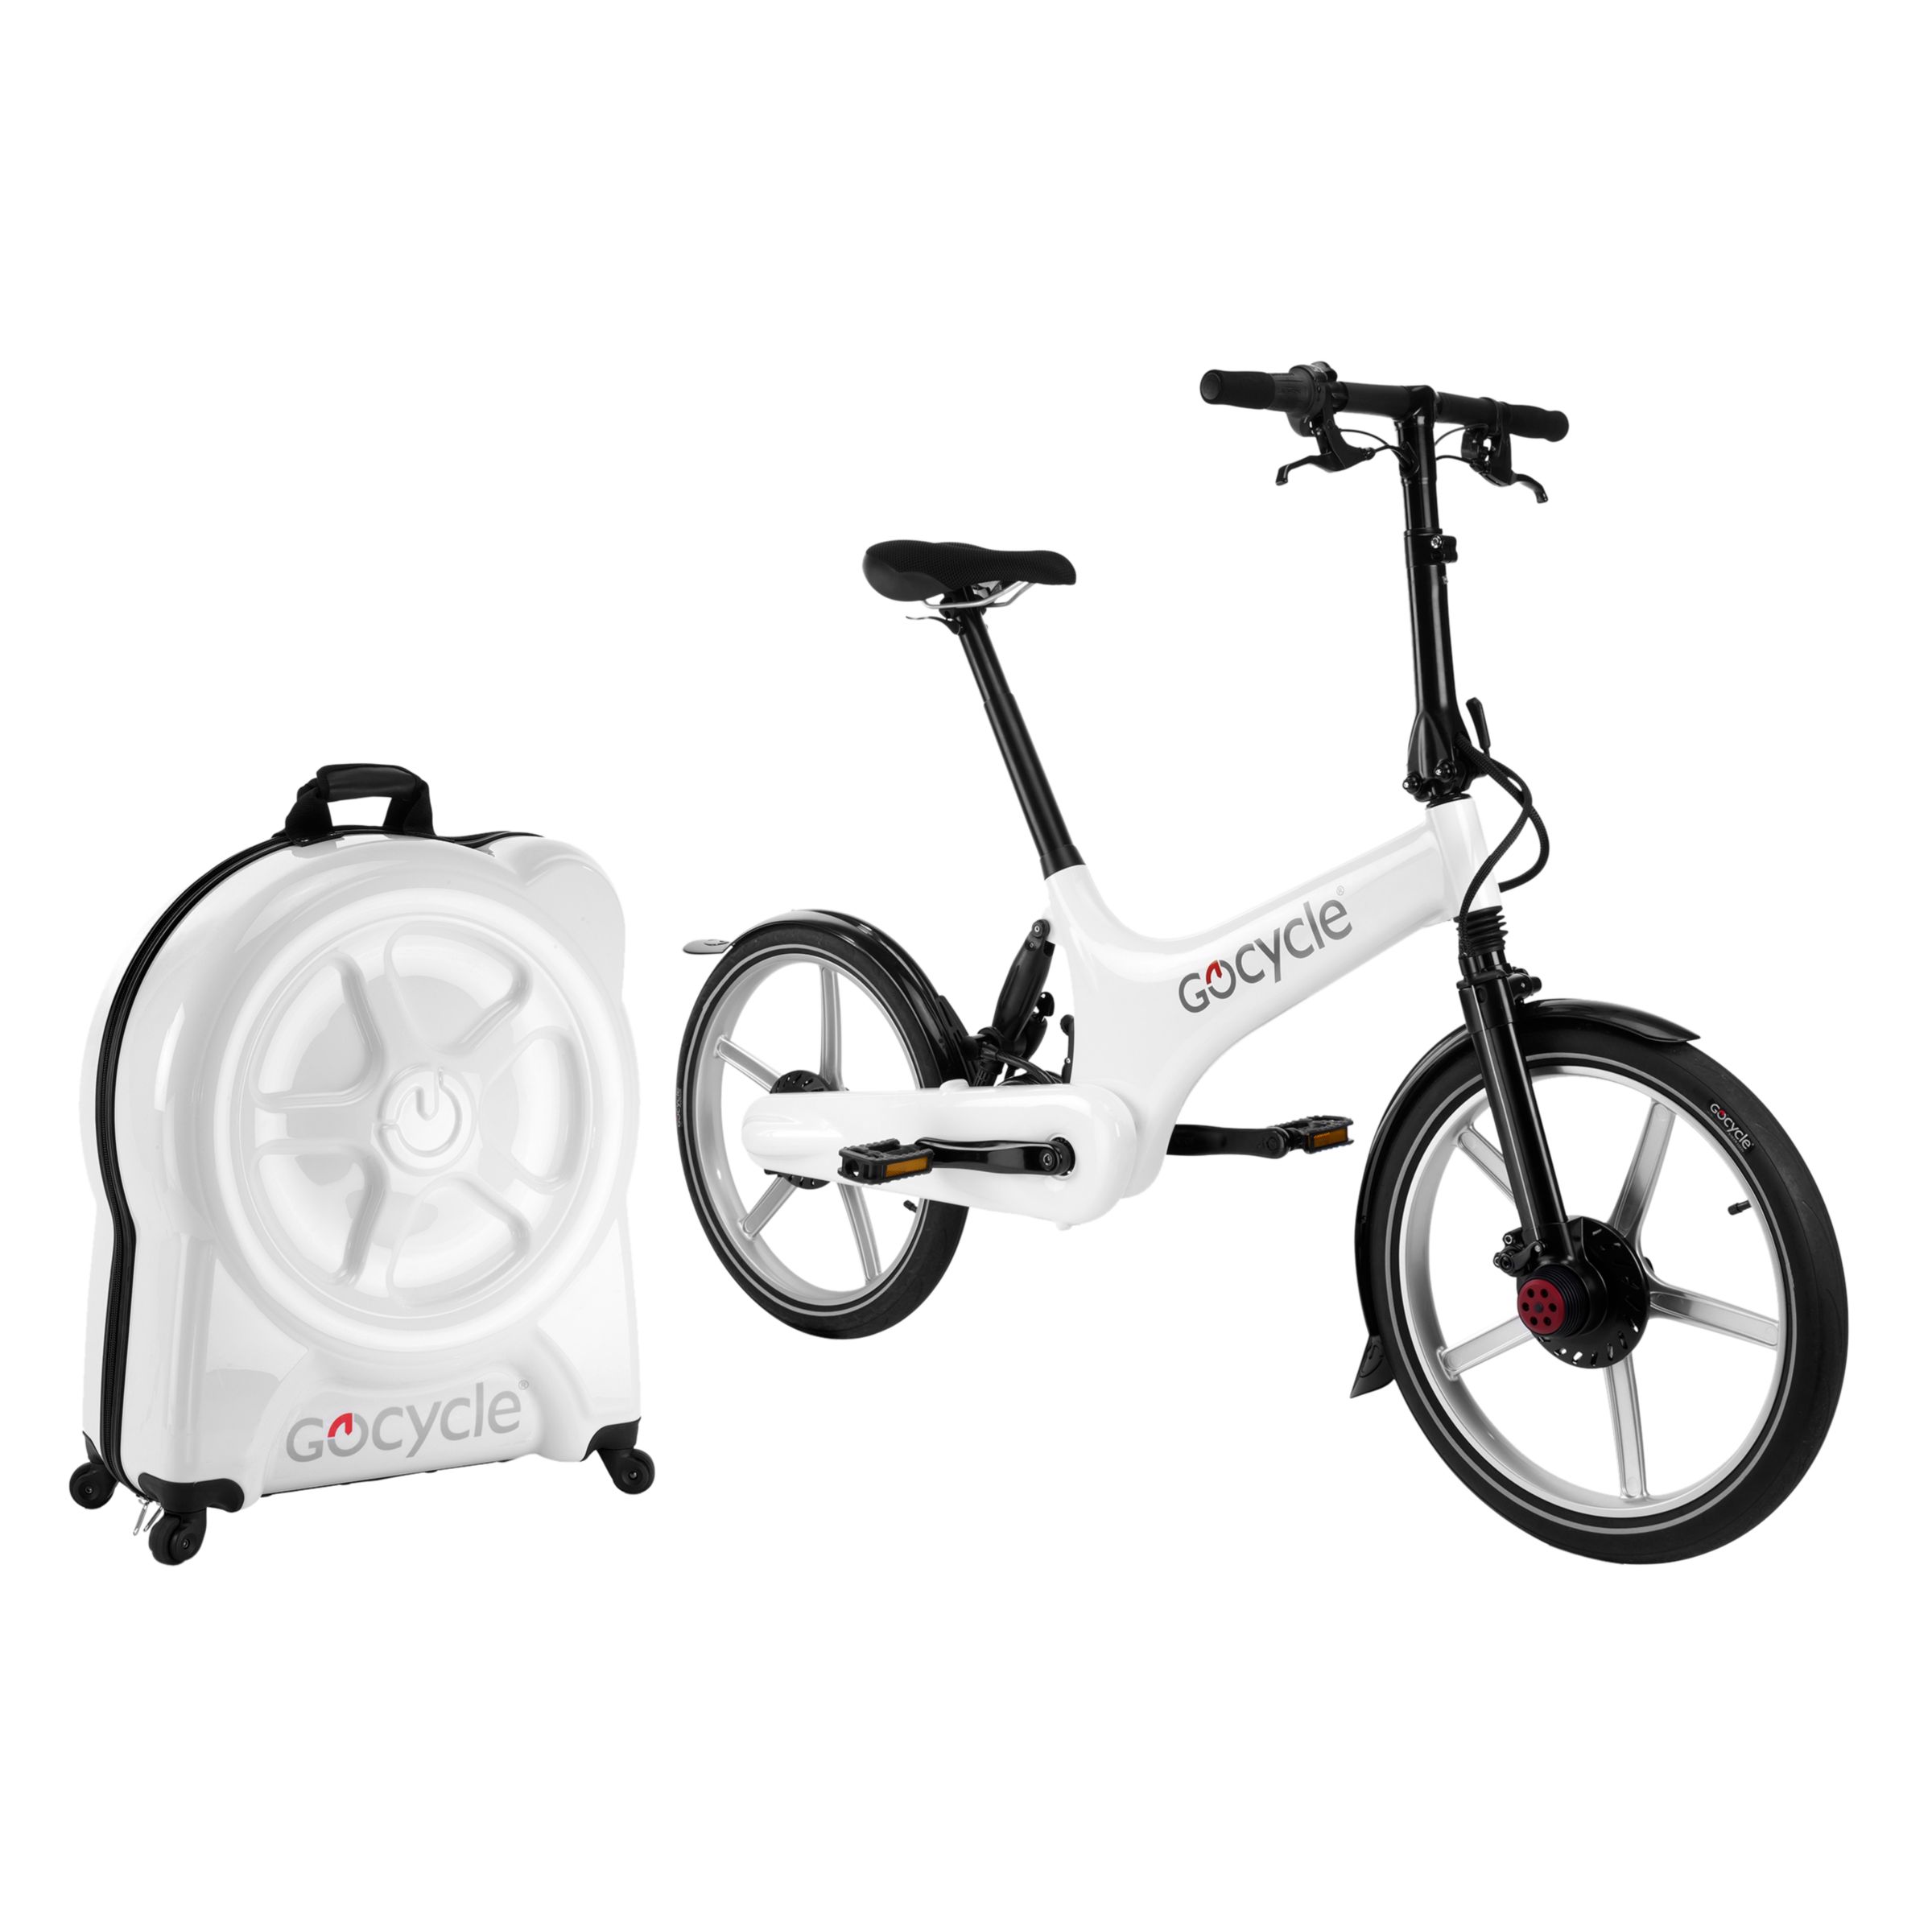 Gocycle Electric Folding Bicycle with Hard Carry Case, White at JohnLewis